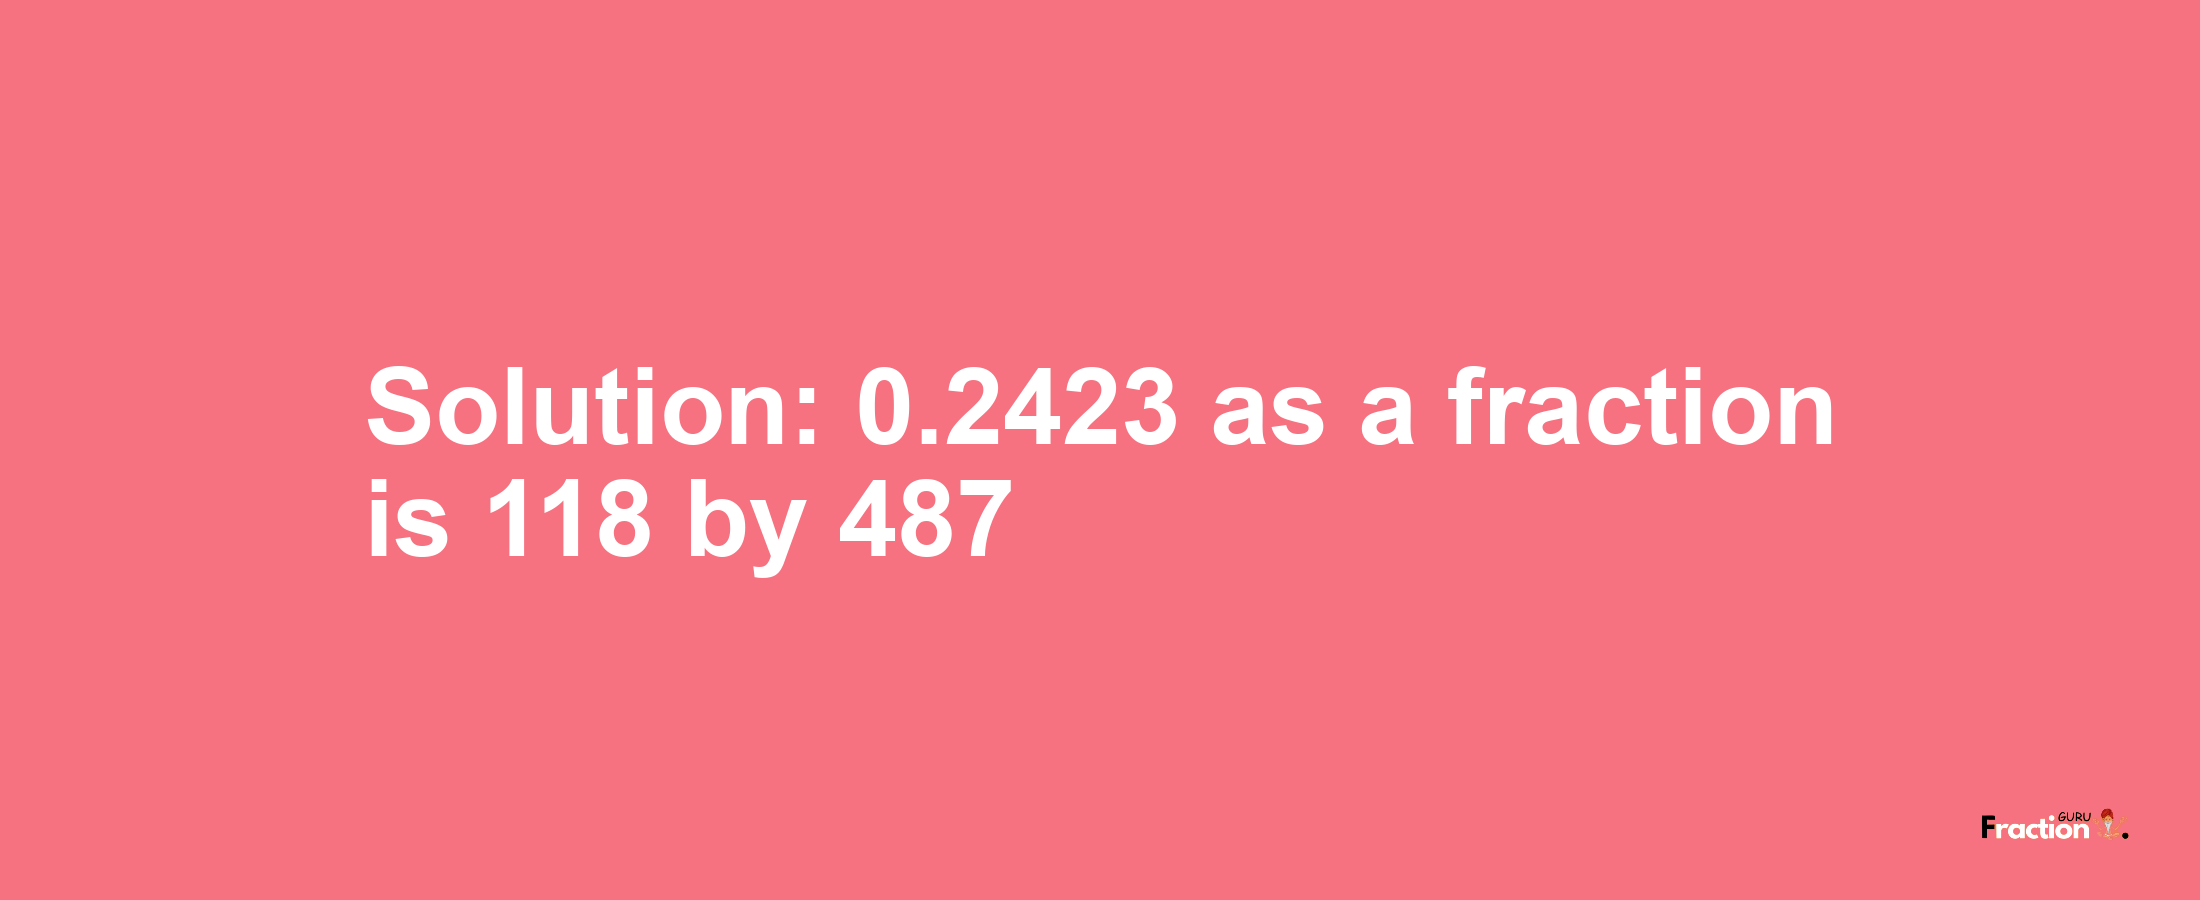 Solution:0.2423 as a fraction is 118/487